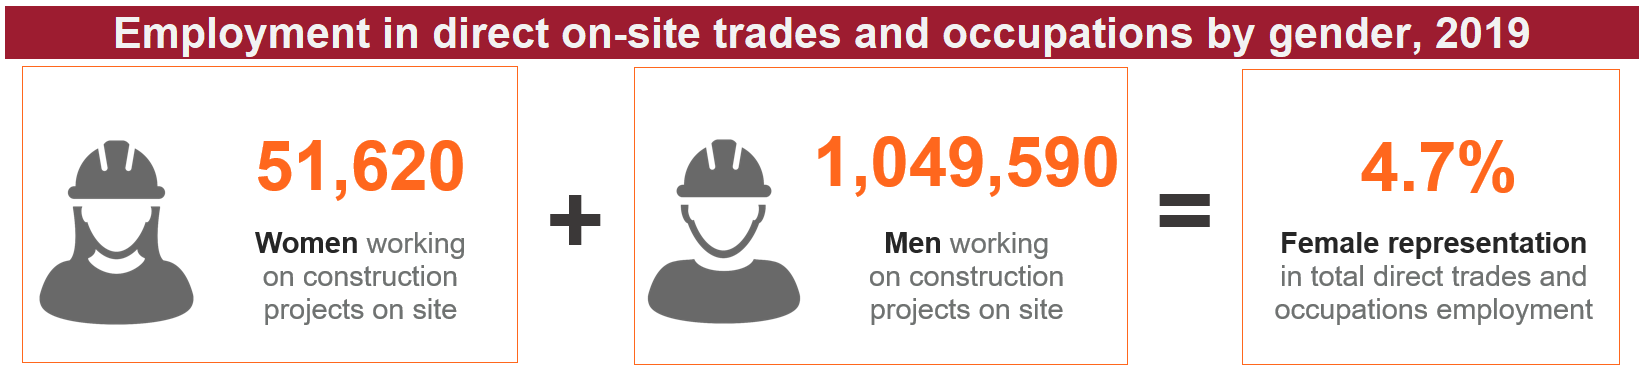 Graphic showing employment in direct on-site trades and occupations by gender in the Canadian construction industry, 2019